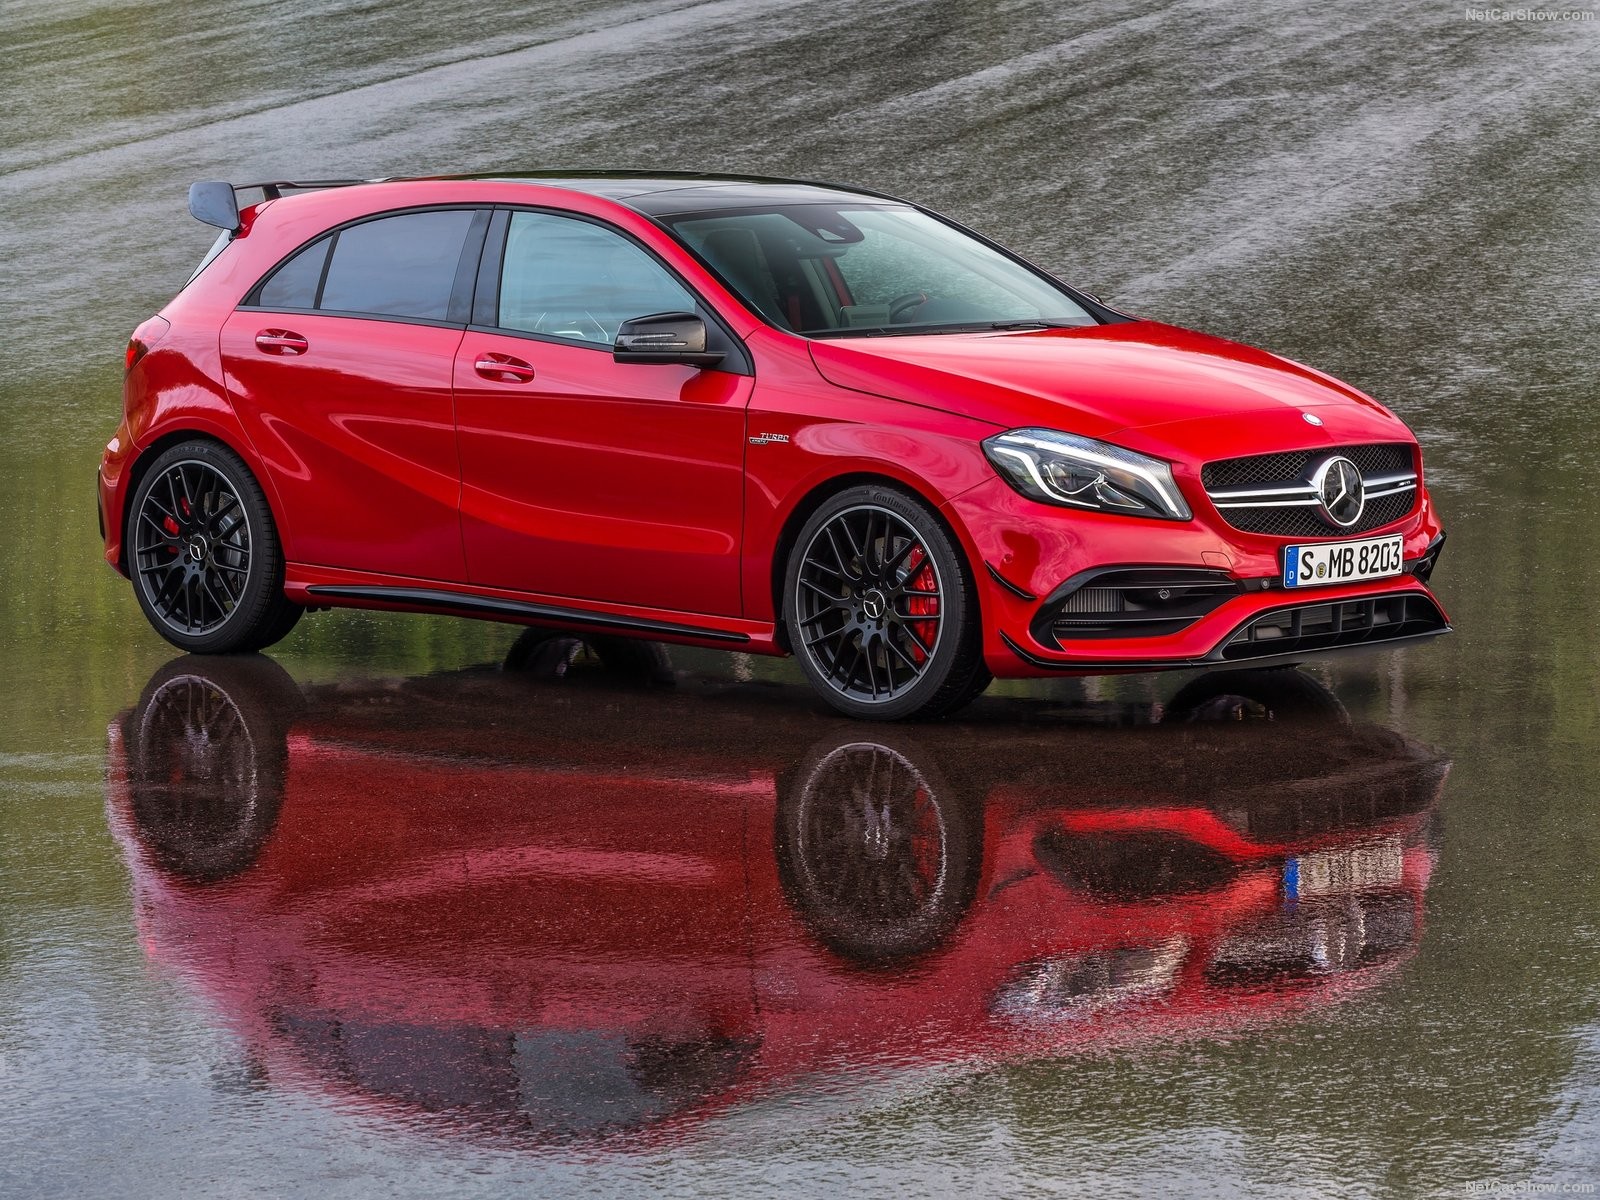 General 1600x1200 Mercedes-Benz Mercedes Benz A45 car reflection vehicle red cars numbers